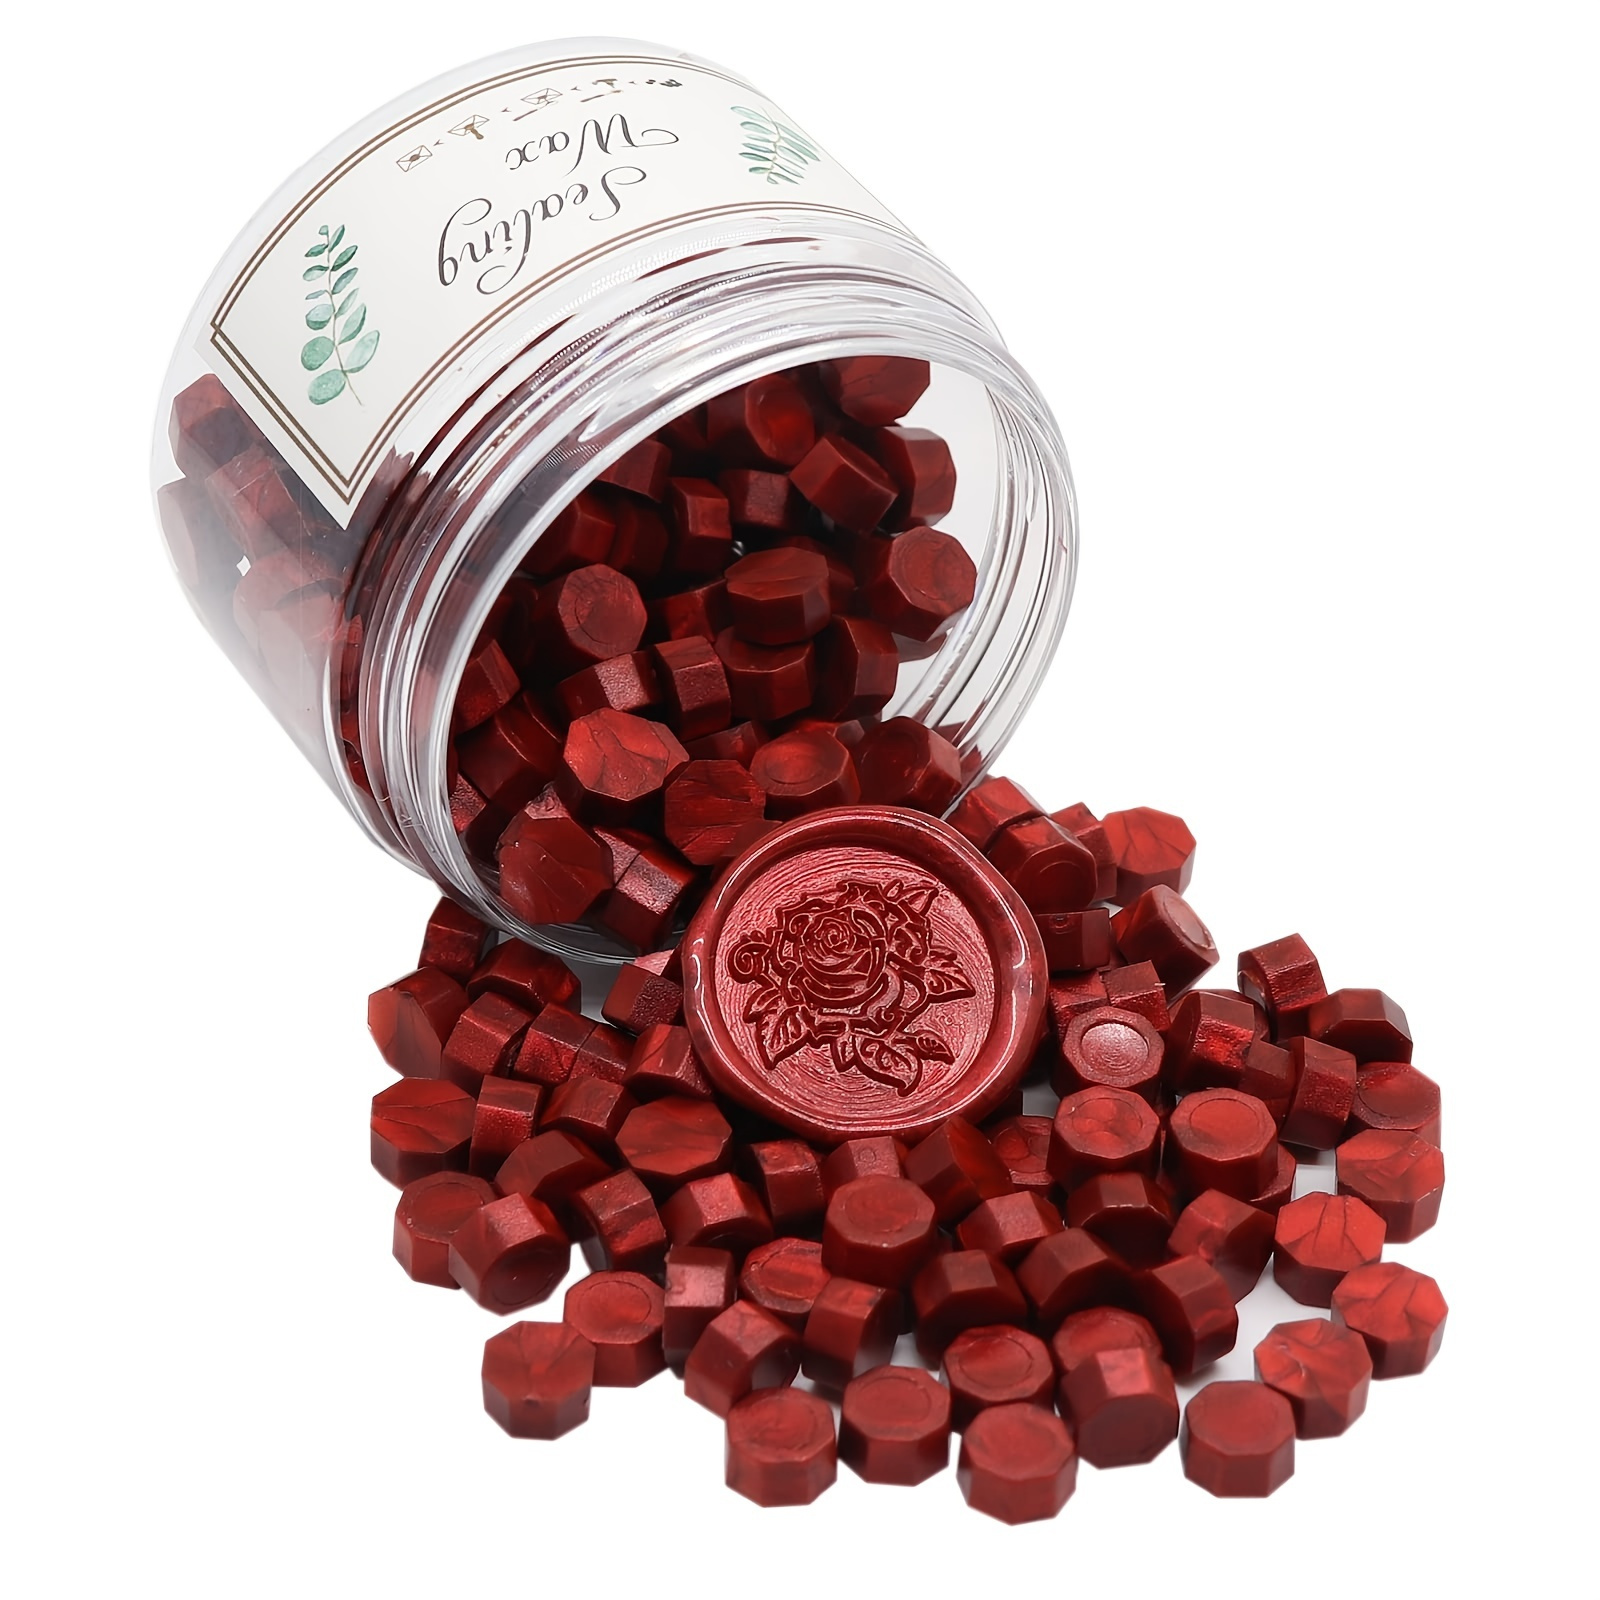 Freund Mayer Sealing Wax Beads in Tin with Spoon- Burgundy